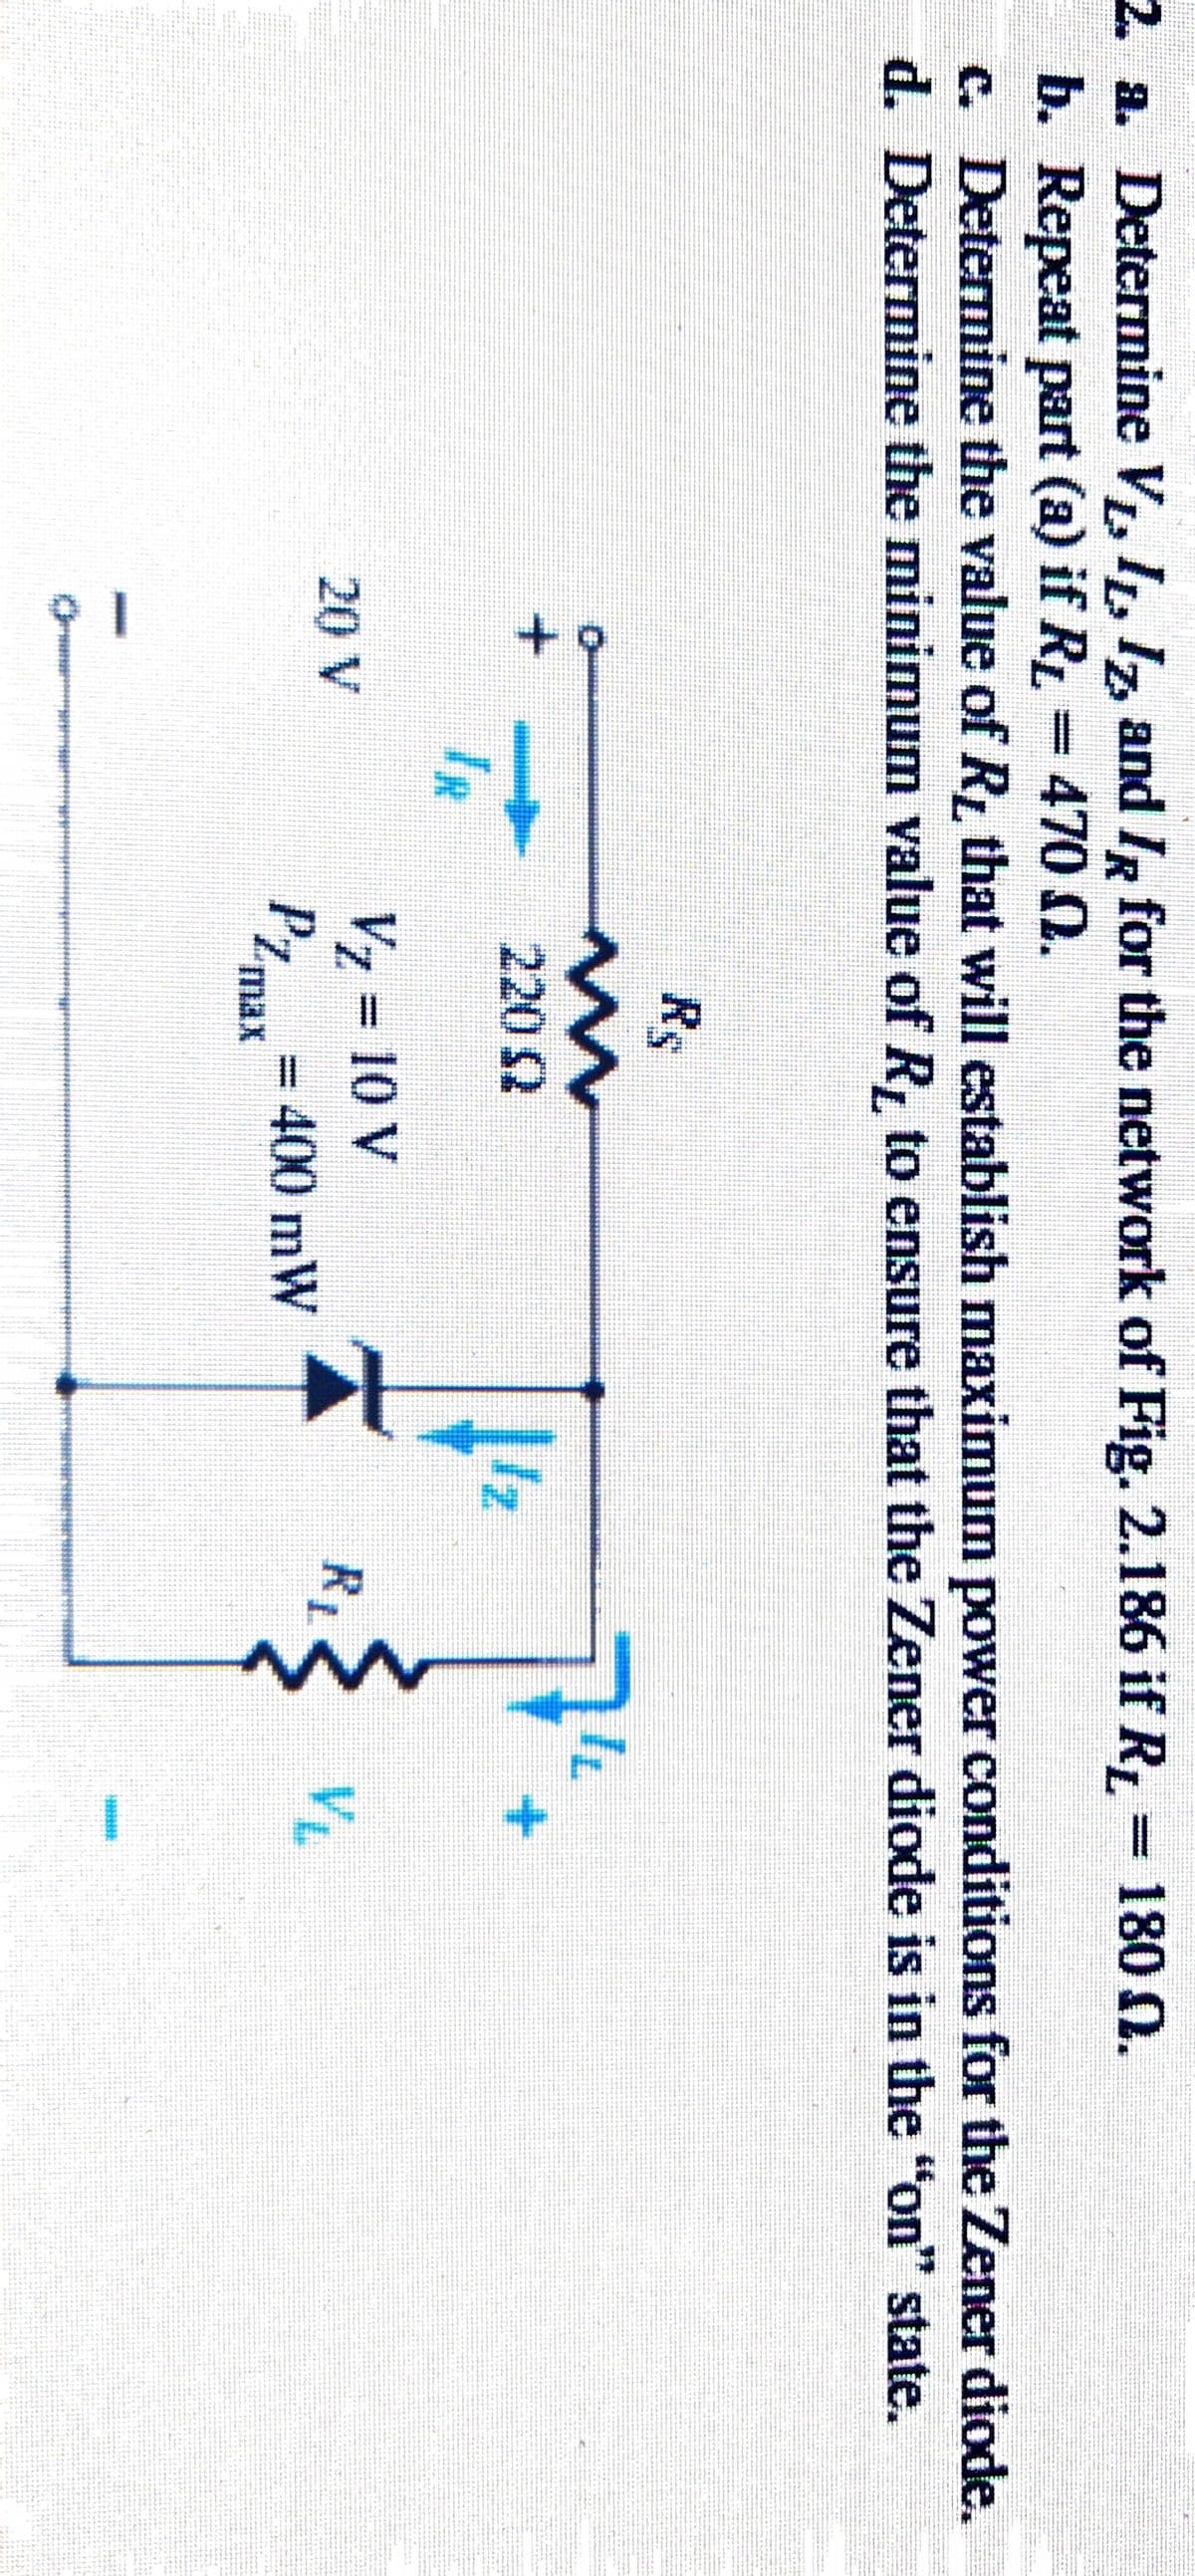 2. a. Determine V, I, Iz, and IR for the network of Fig. 2.186 if R,= 180 0.
b. Repeat part (a) if RL = 470 N.
c. Determine the value of R that will establish maximum power conditions for the Zener diode.
d. Determine the minimum value of R, to ensure that the Zener diode is in the "on" state.
Rs
220 2
Iz
IR
V7 = 10 V
PZmar= 400 mW
%3D
20 V
RL
VL
%3D
max
